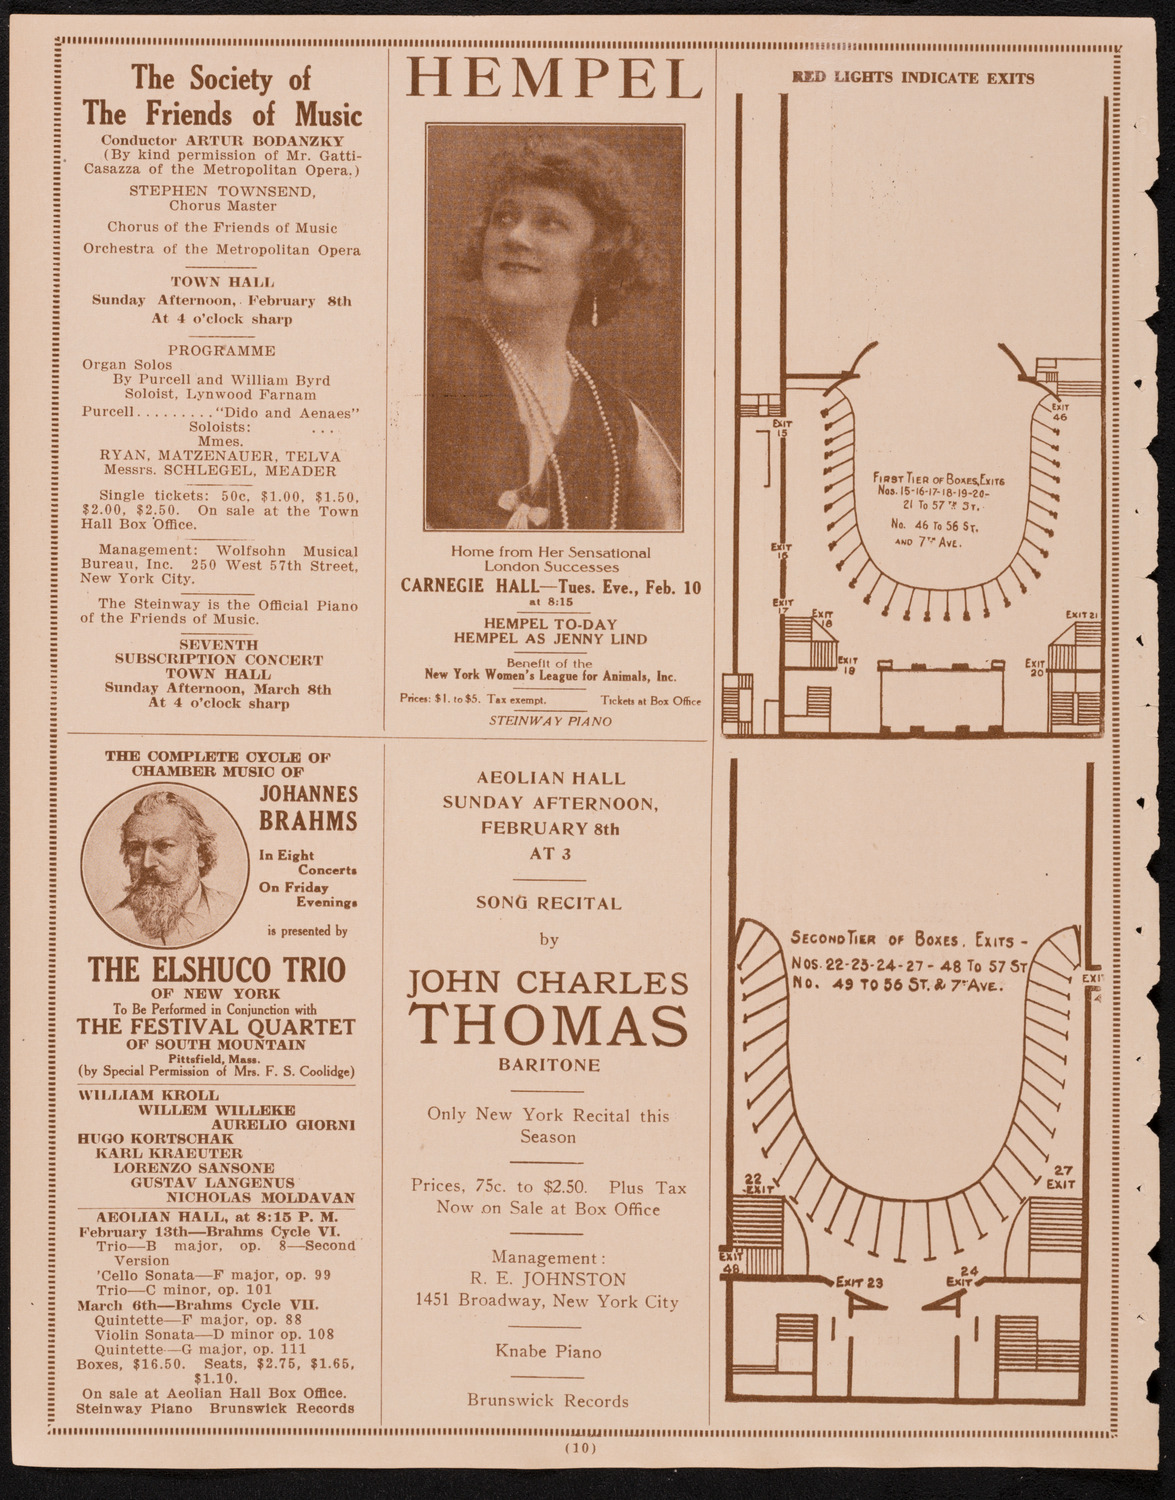 Concert presented by the Jewish National Workers' Alliance, New York City Committee, February 7, 1925, program page 10